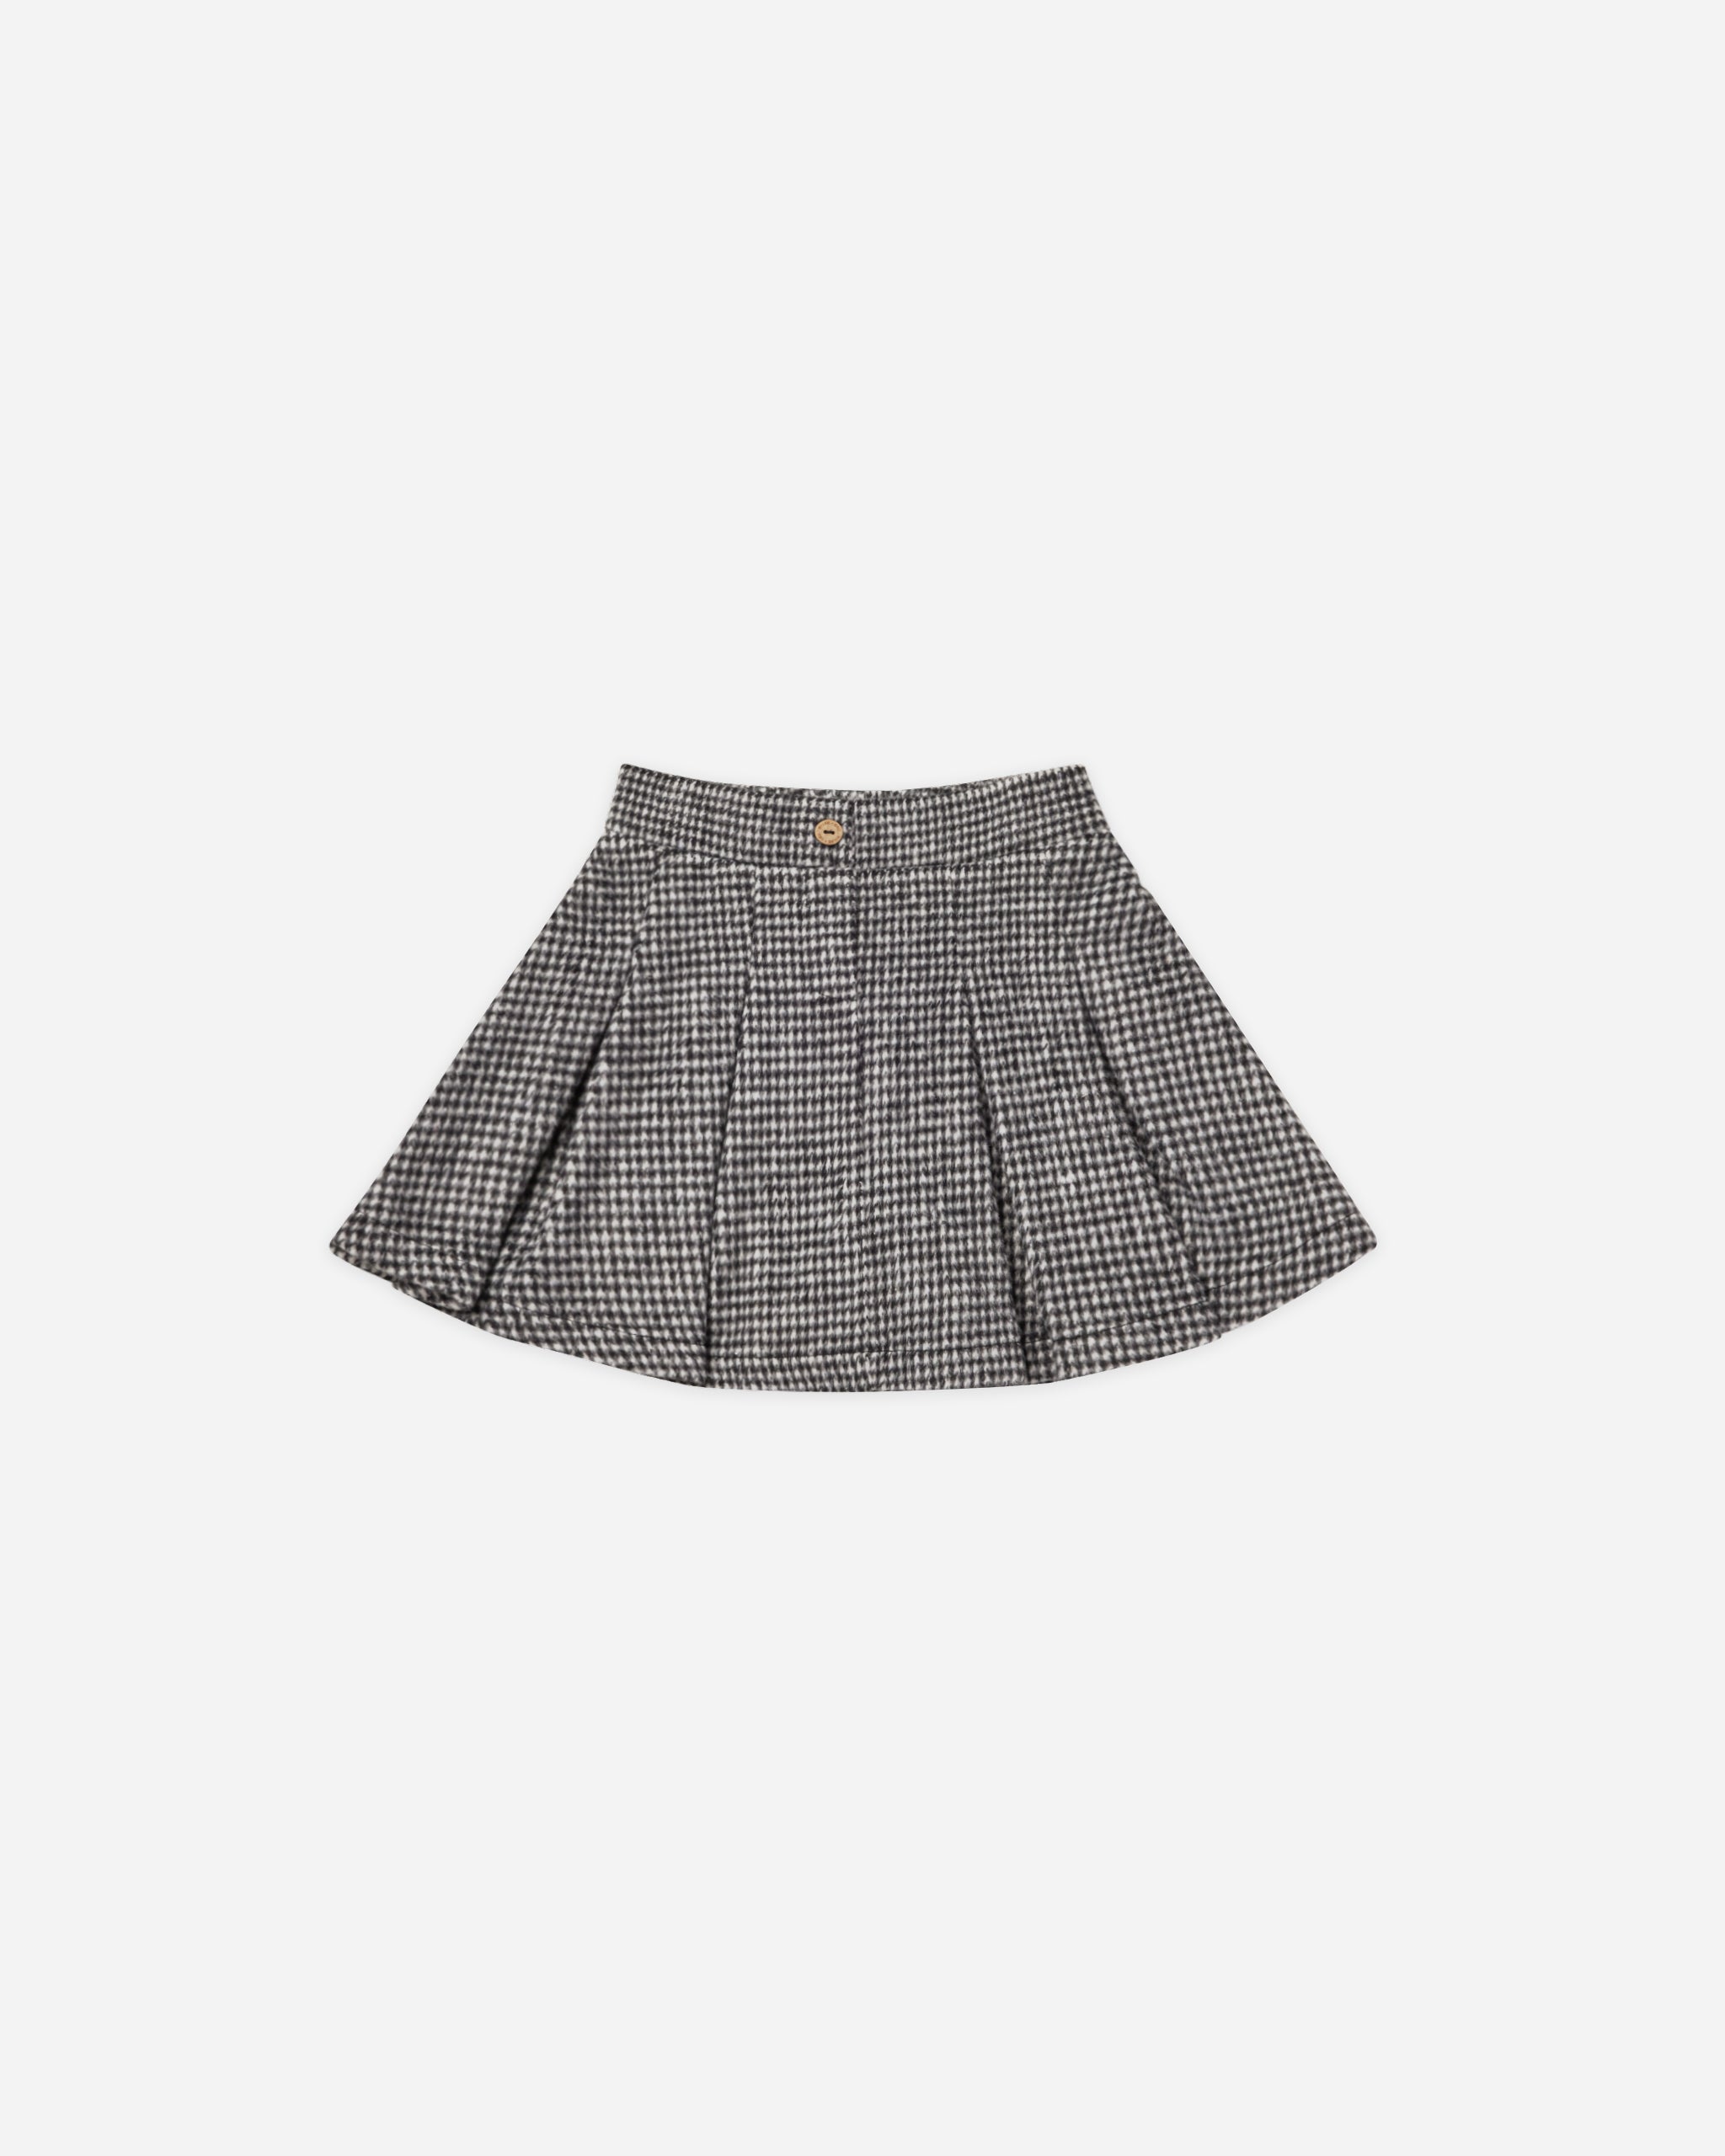 Tailored Skirt || Black Houndstooth - Rylee + Cru | Kids Clothes | Trendy Baby Clothes | Modern Infant Outfits |